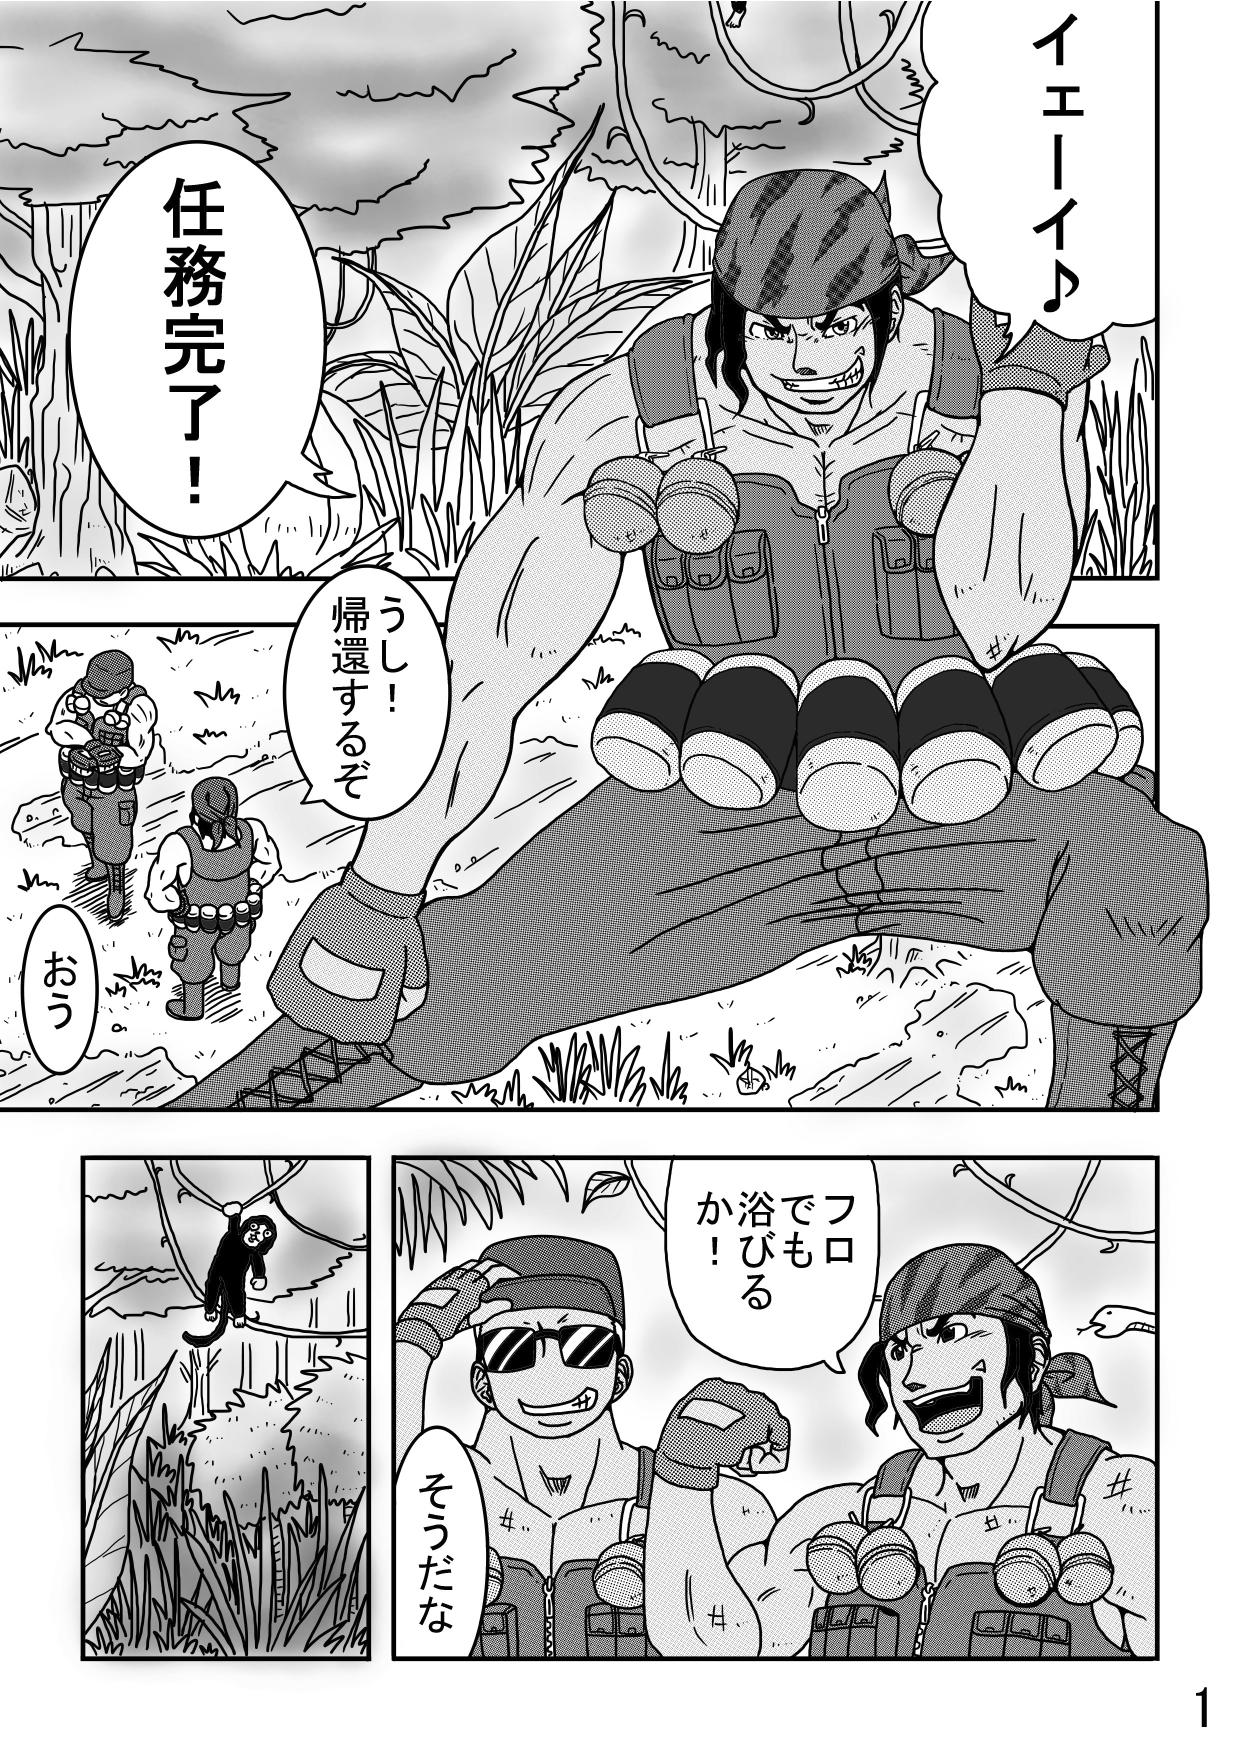 Mask レオナ風呂 - King of fighters Highheels - Page 3